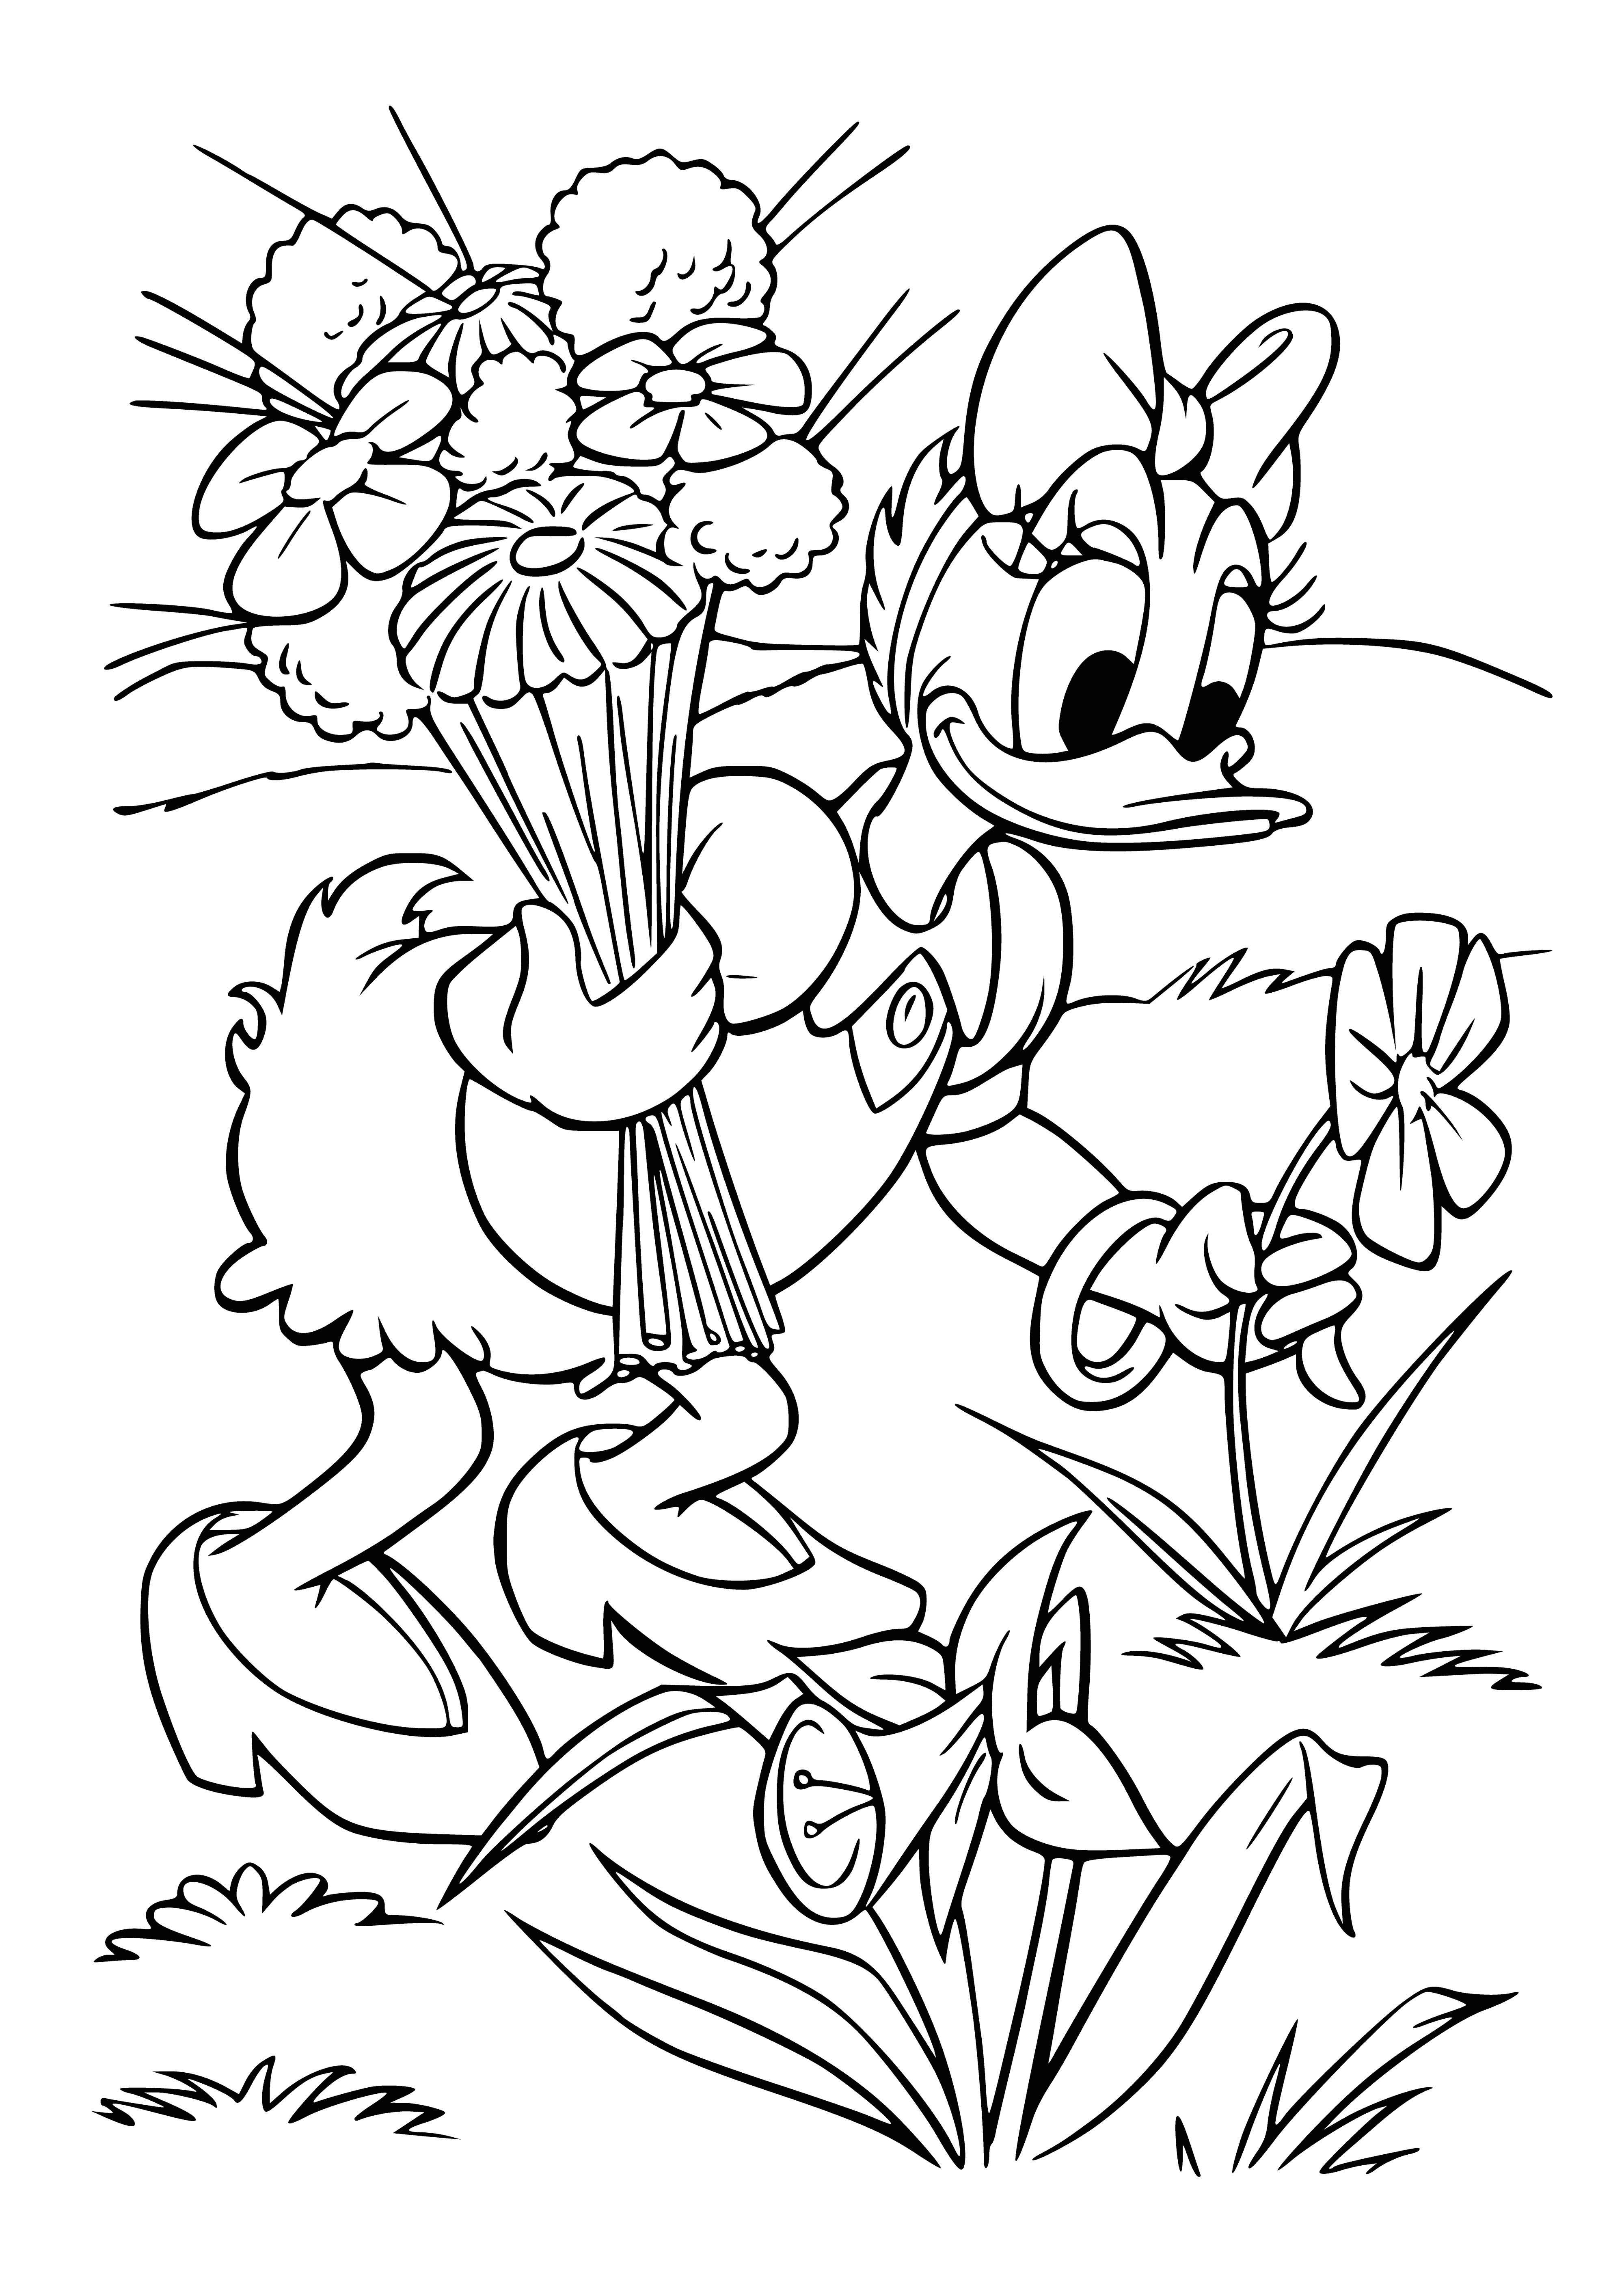 coloring page: Mickey welcomes Spring w/ flowers, watering can & "Spring" in colorful letters. #Disney #ColoringPage